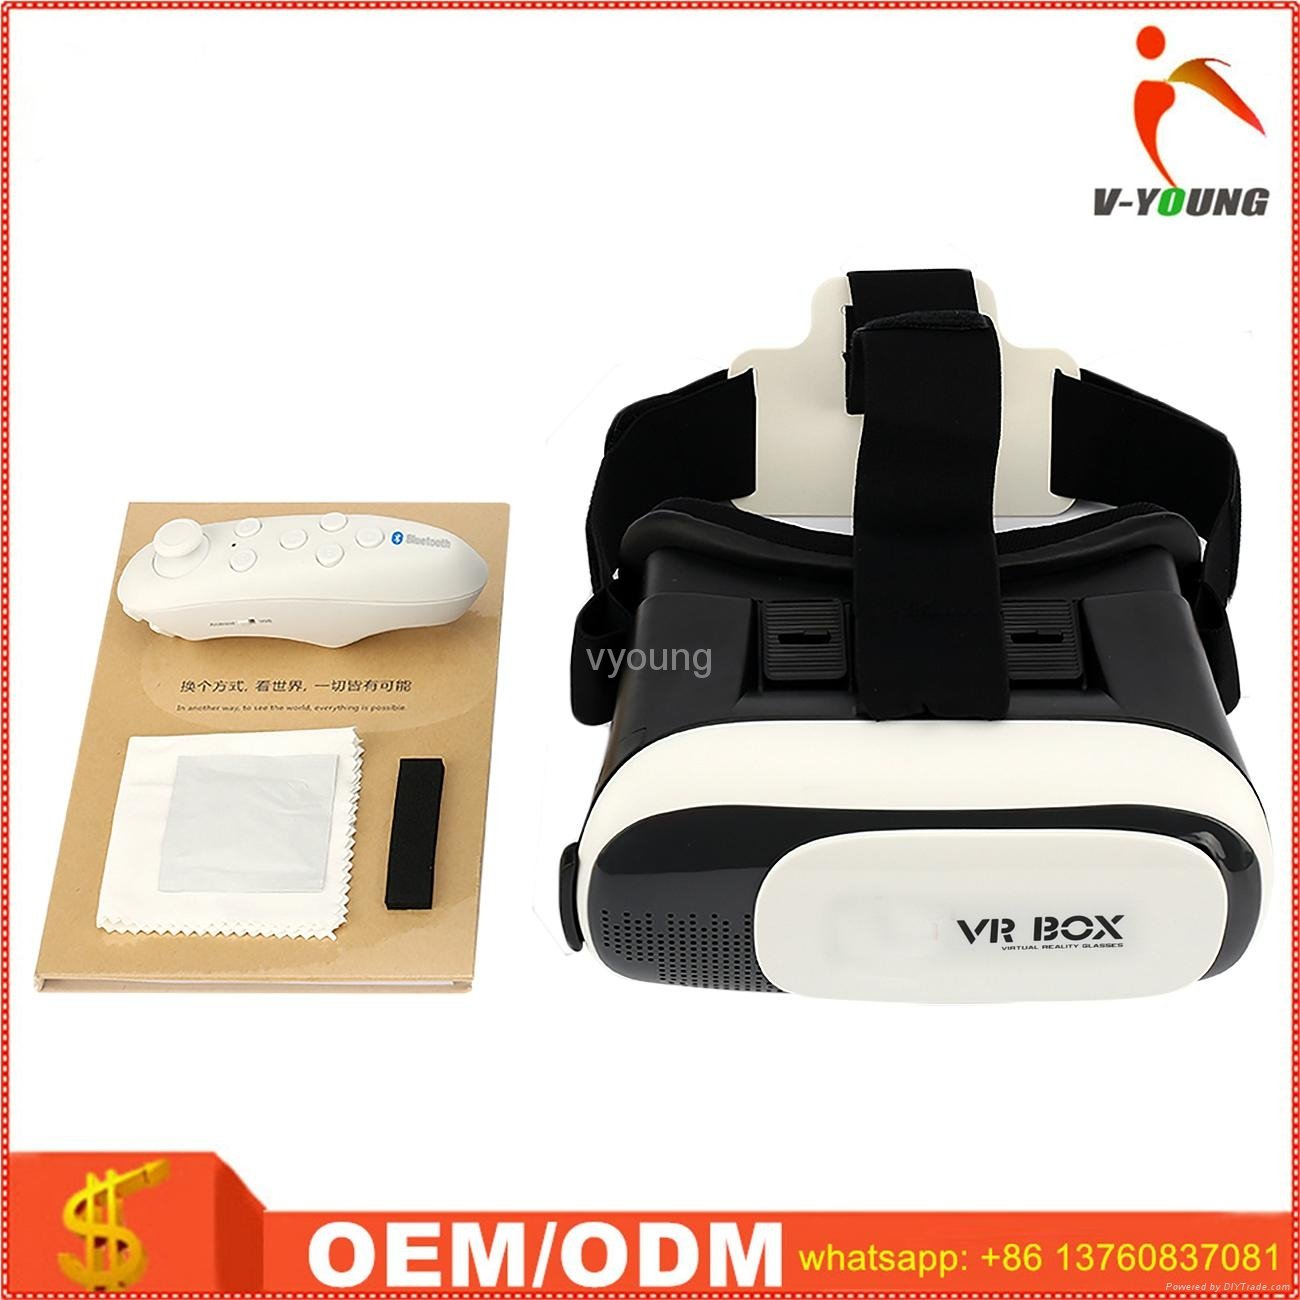 VR Case VR Box 2.0 Version Virtual Reality 3D Glasses with Remote  Controller - VR02 - vr box (China Manufacturer) - Eyewear & Parts - Home